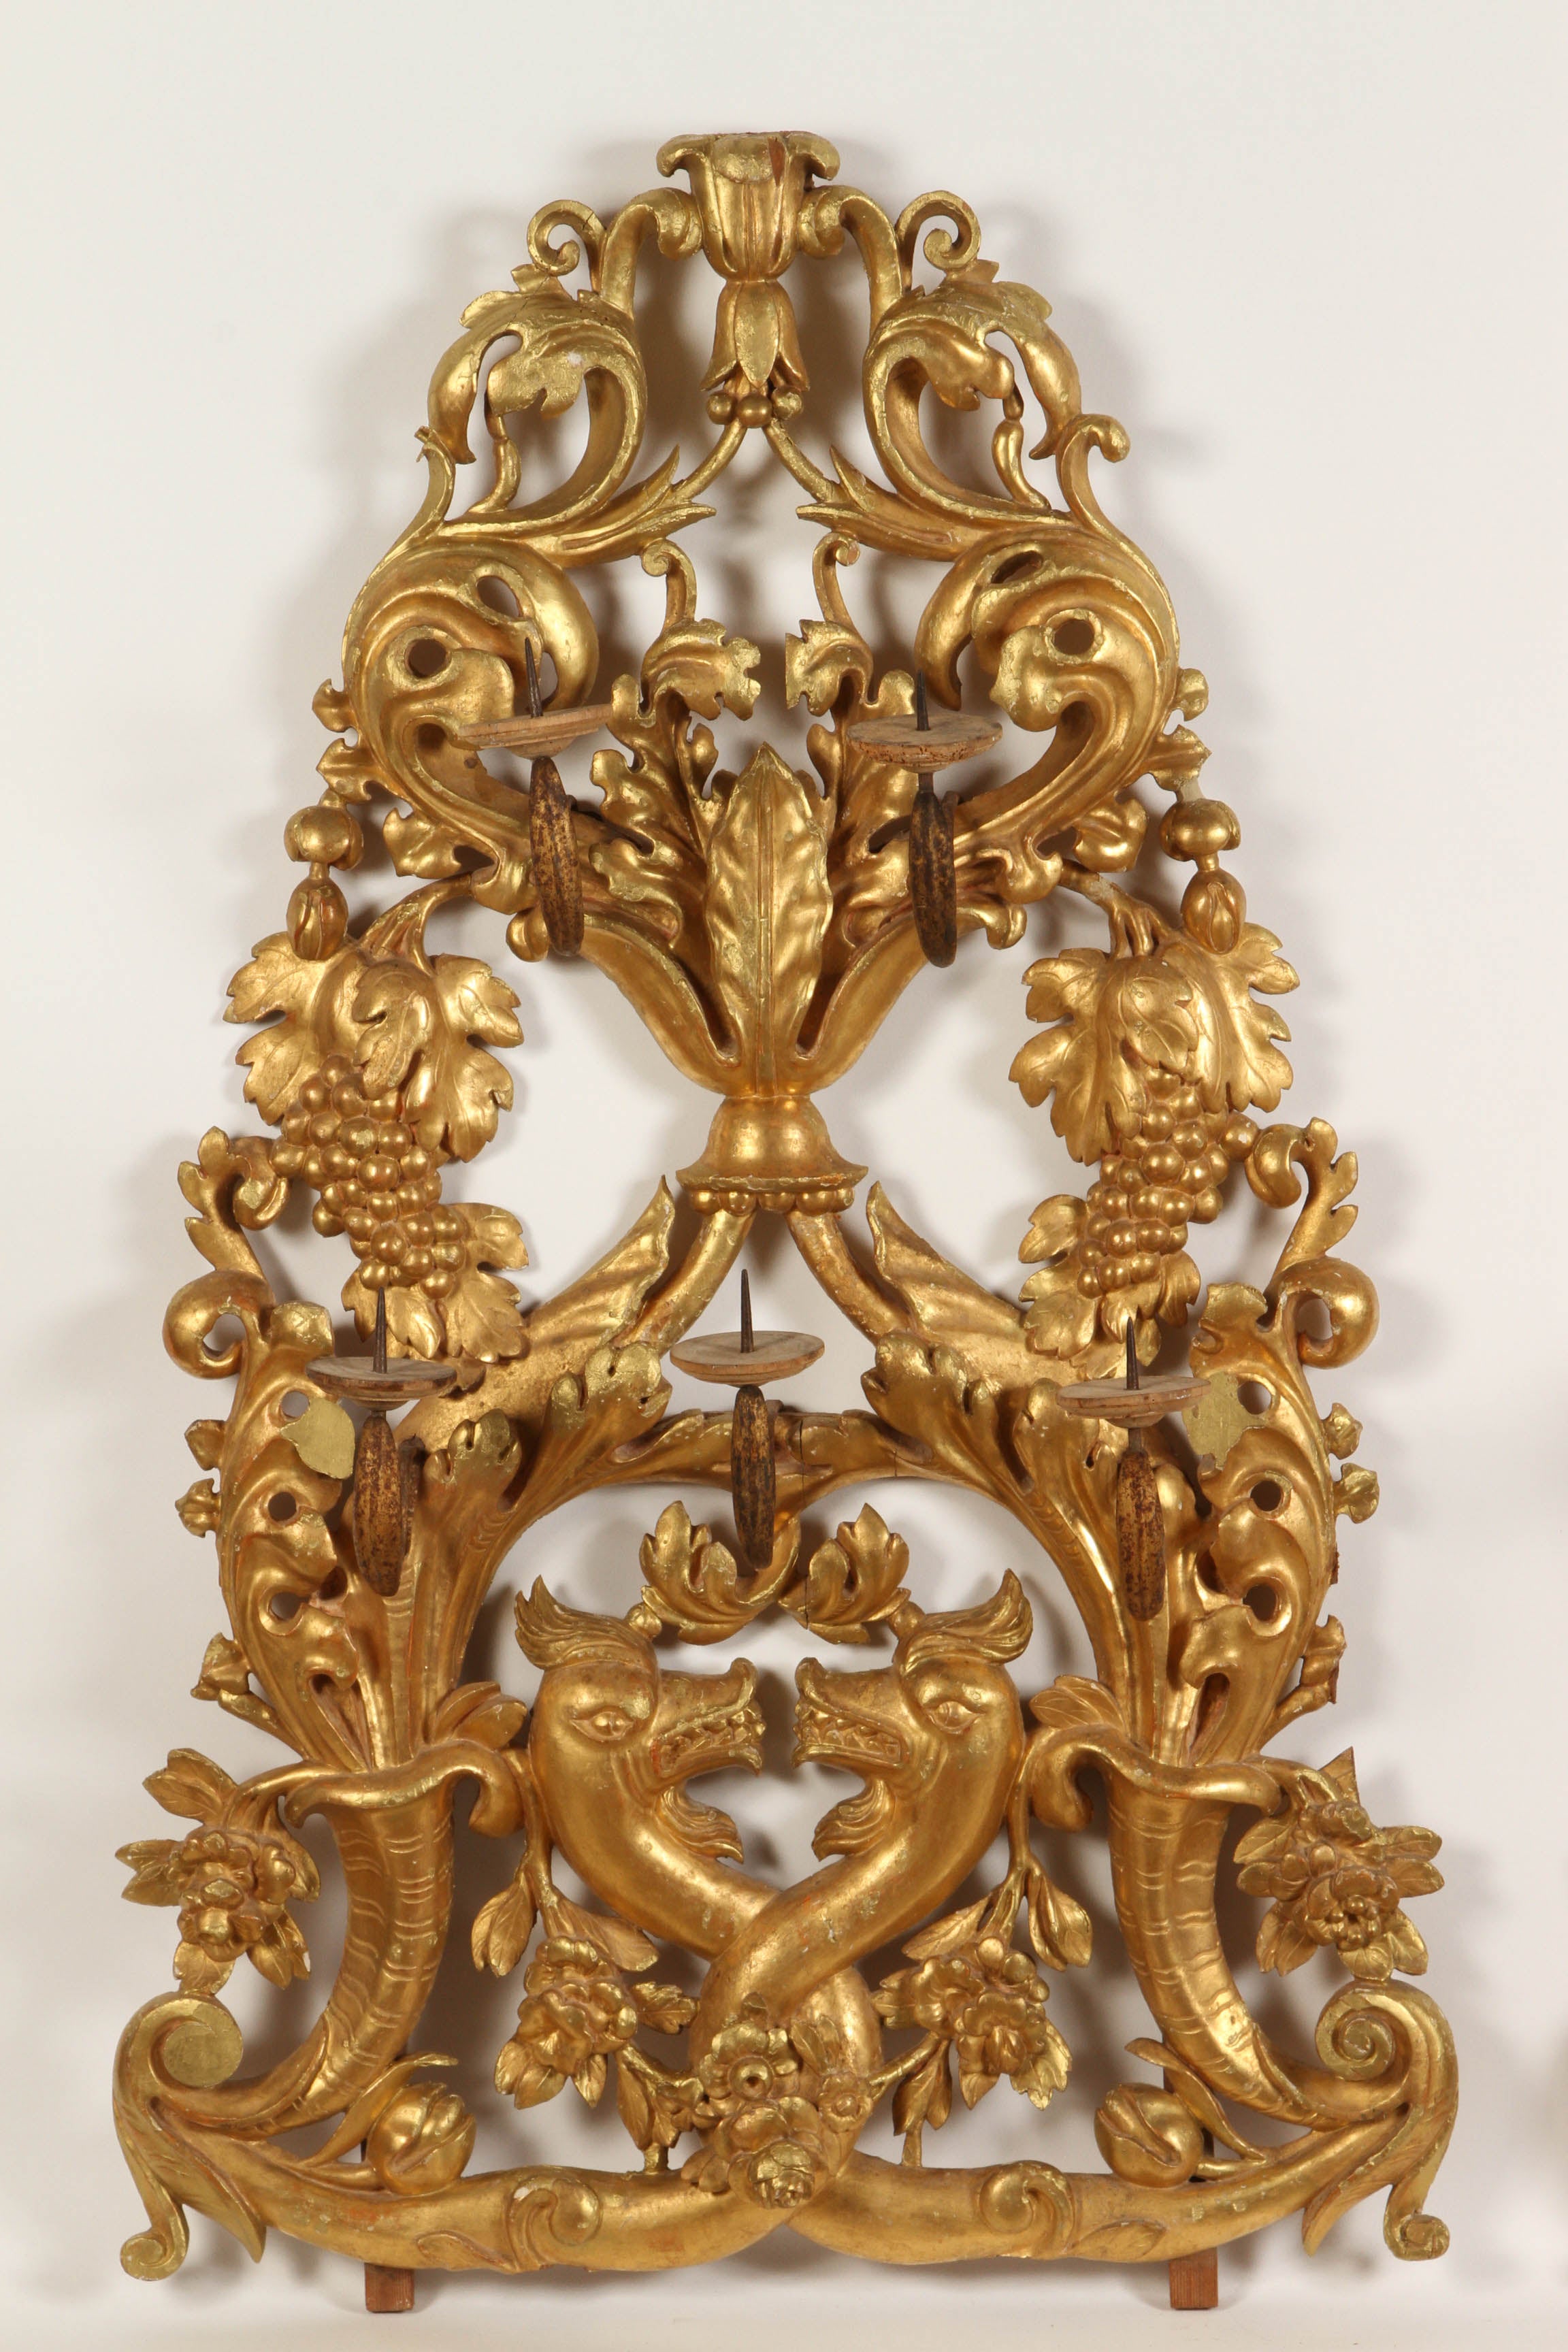 A pair of Venetian gilt wall sconces, with 5 lights for candles, grapes and acanthus leaves, with mythological sea creatures. 